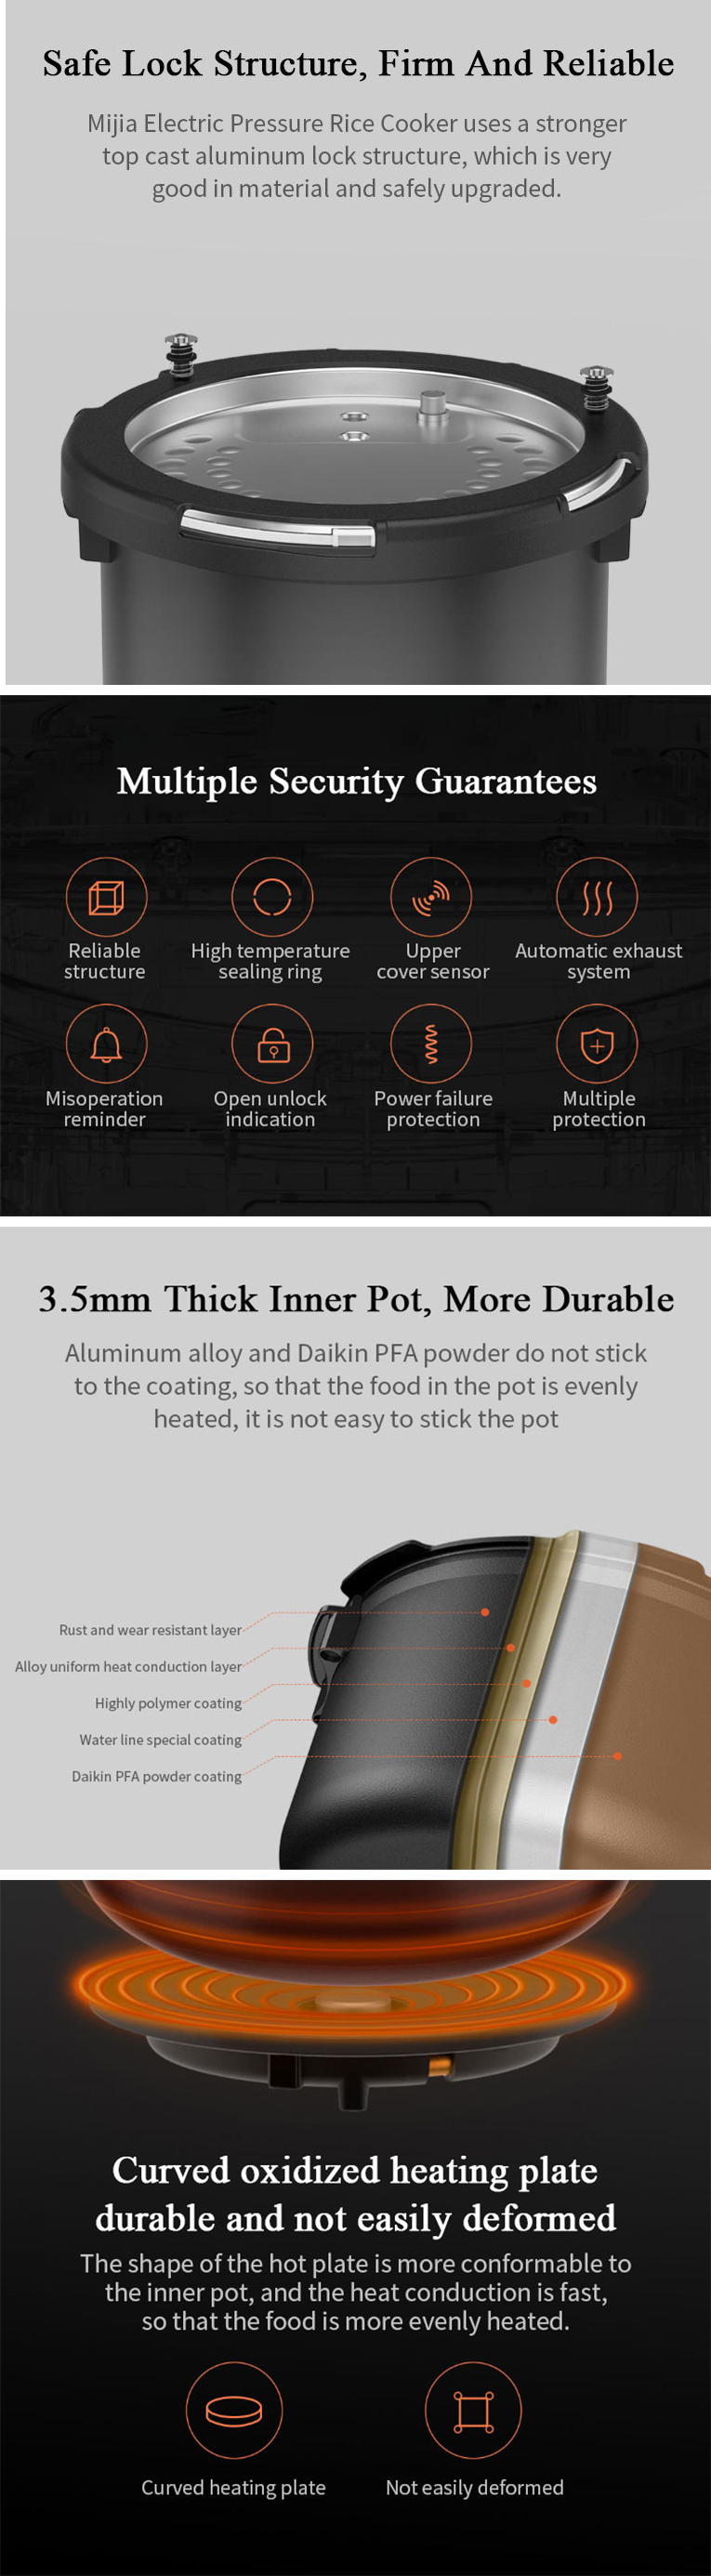 XIAOMI Mijia YLG01CM Electric Rice Cooker Smart Home 5L Alloy Cast Iron Heating Pressure Cooker Multicooker Kitchen 41